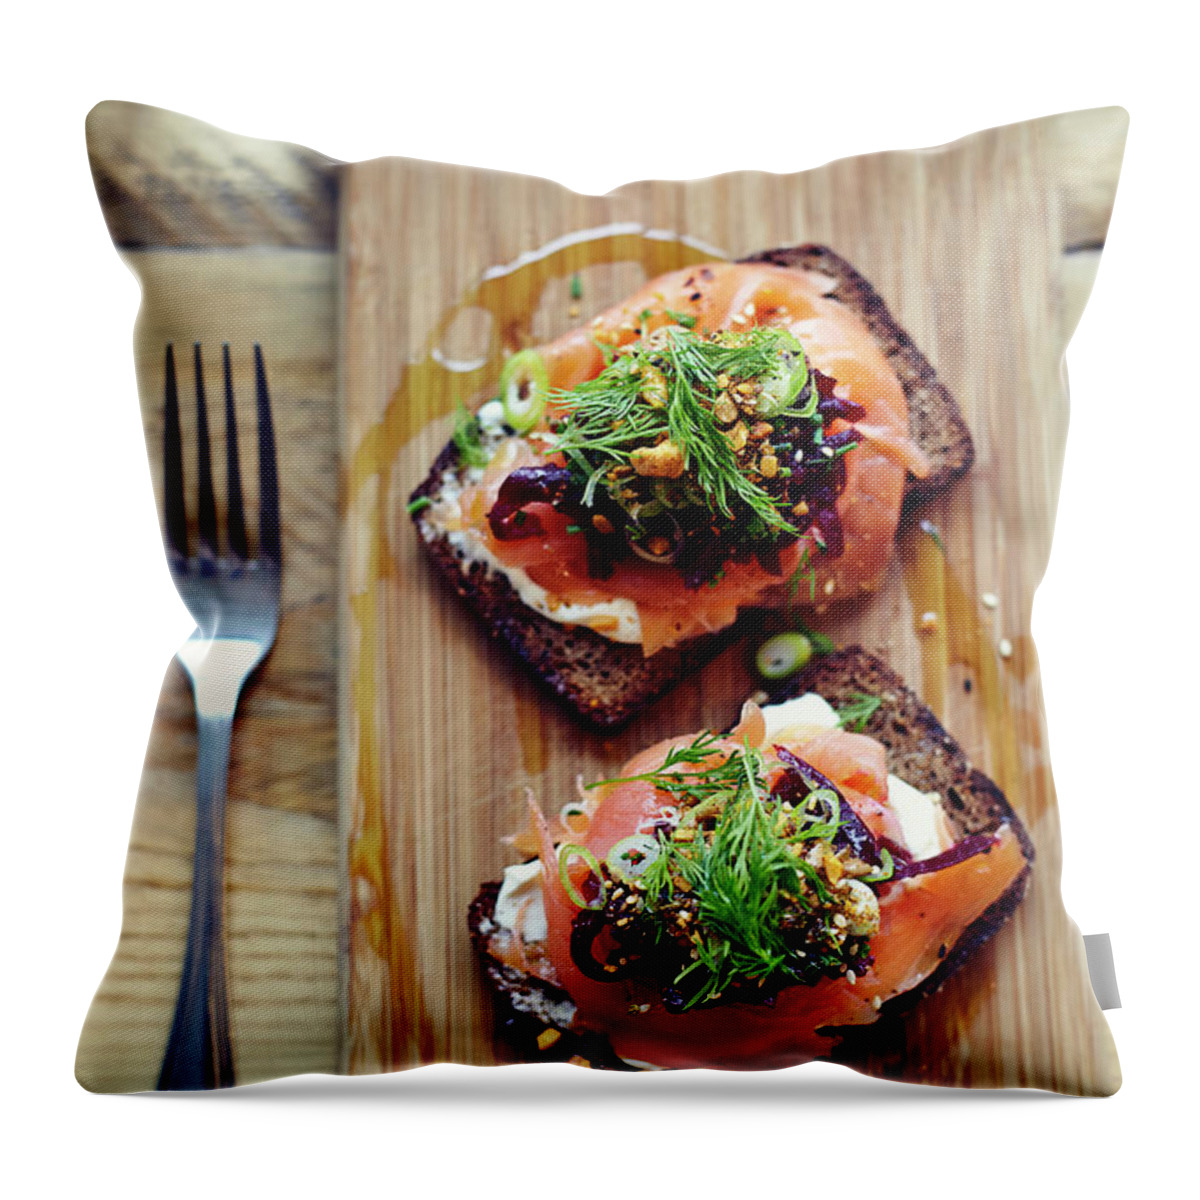 Bakery Throw Pillow featuring the photograph Salmon Tartine On Rye Bread On Wooden by Jake Curtis